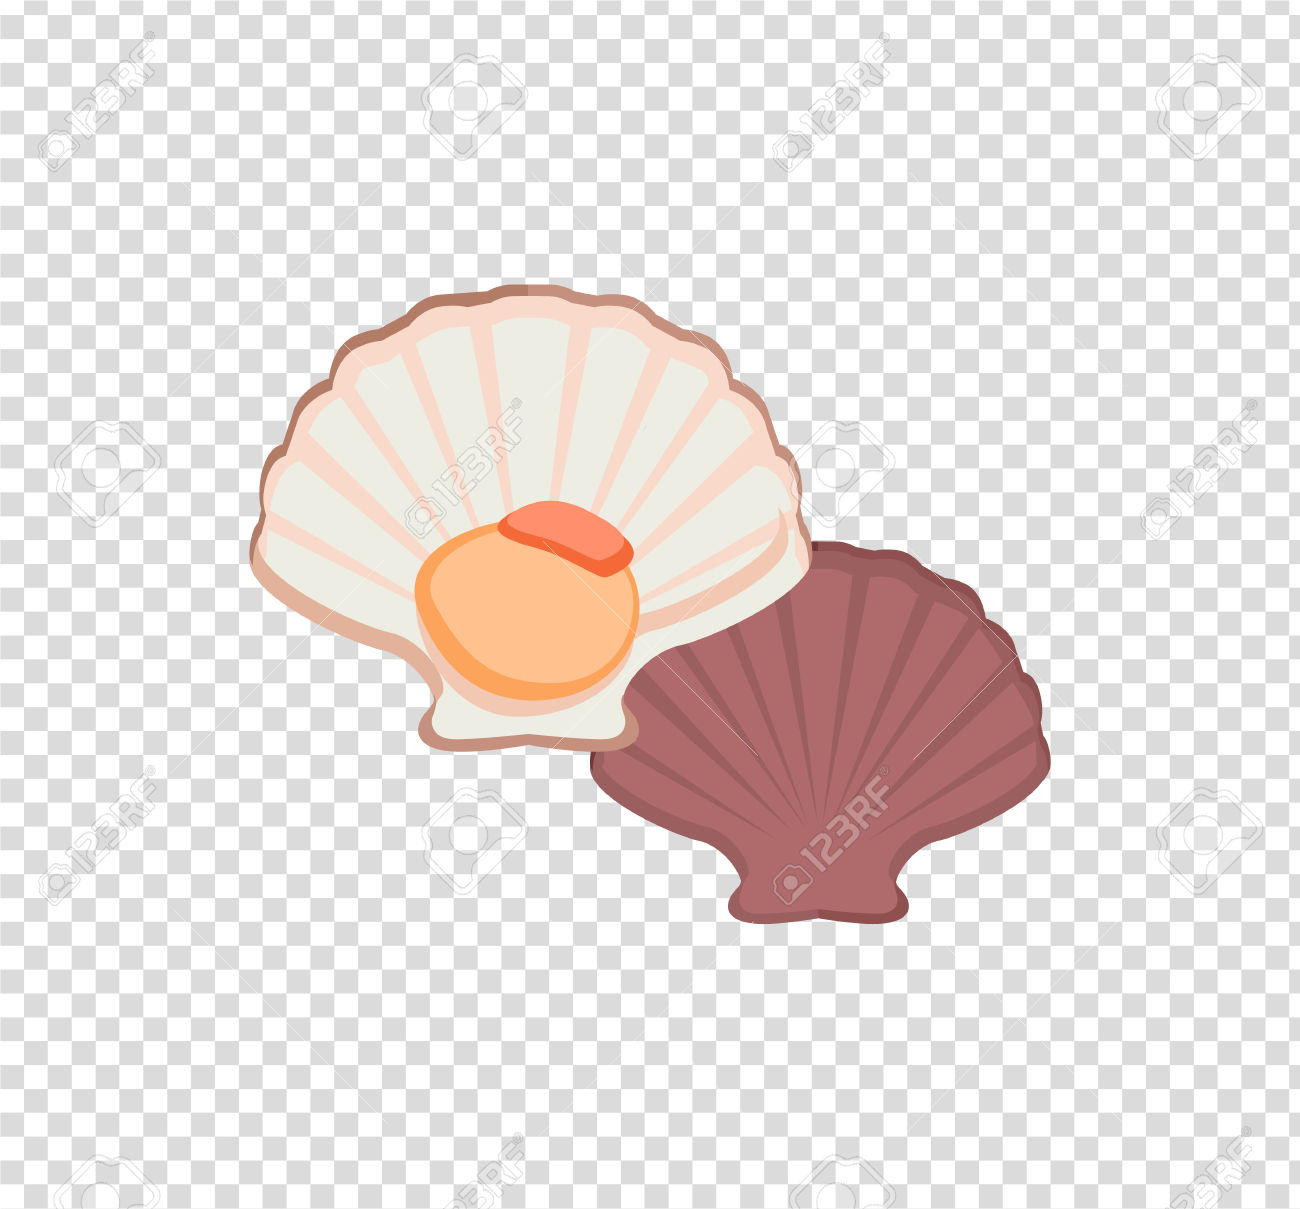 Oysters In Colour Variant. Seafood Concept Icons In Flat Style.